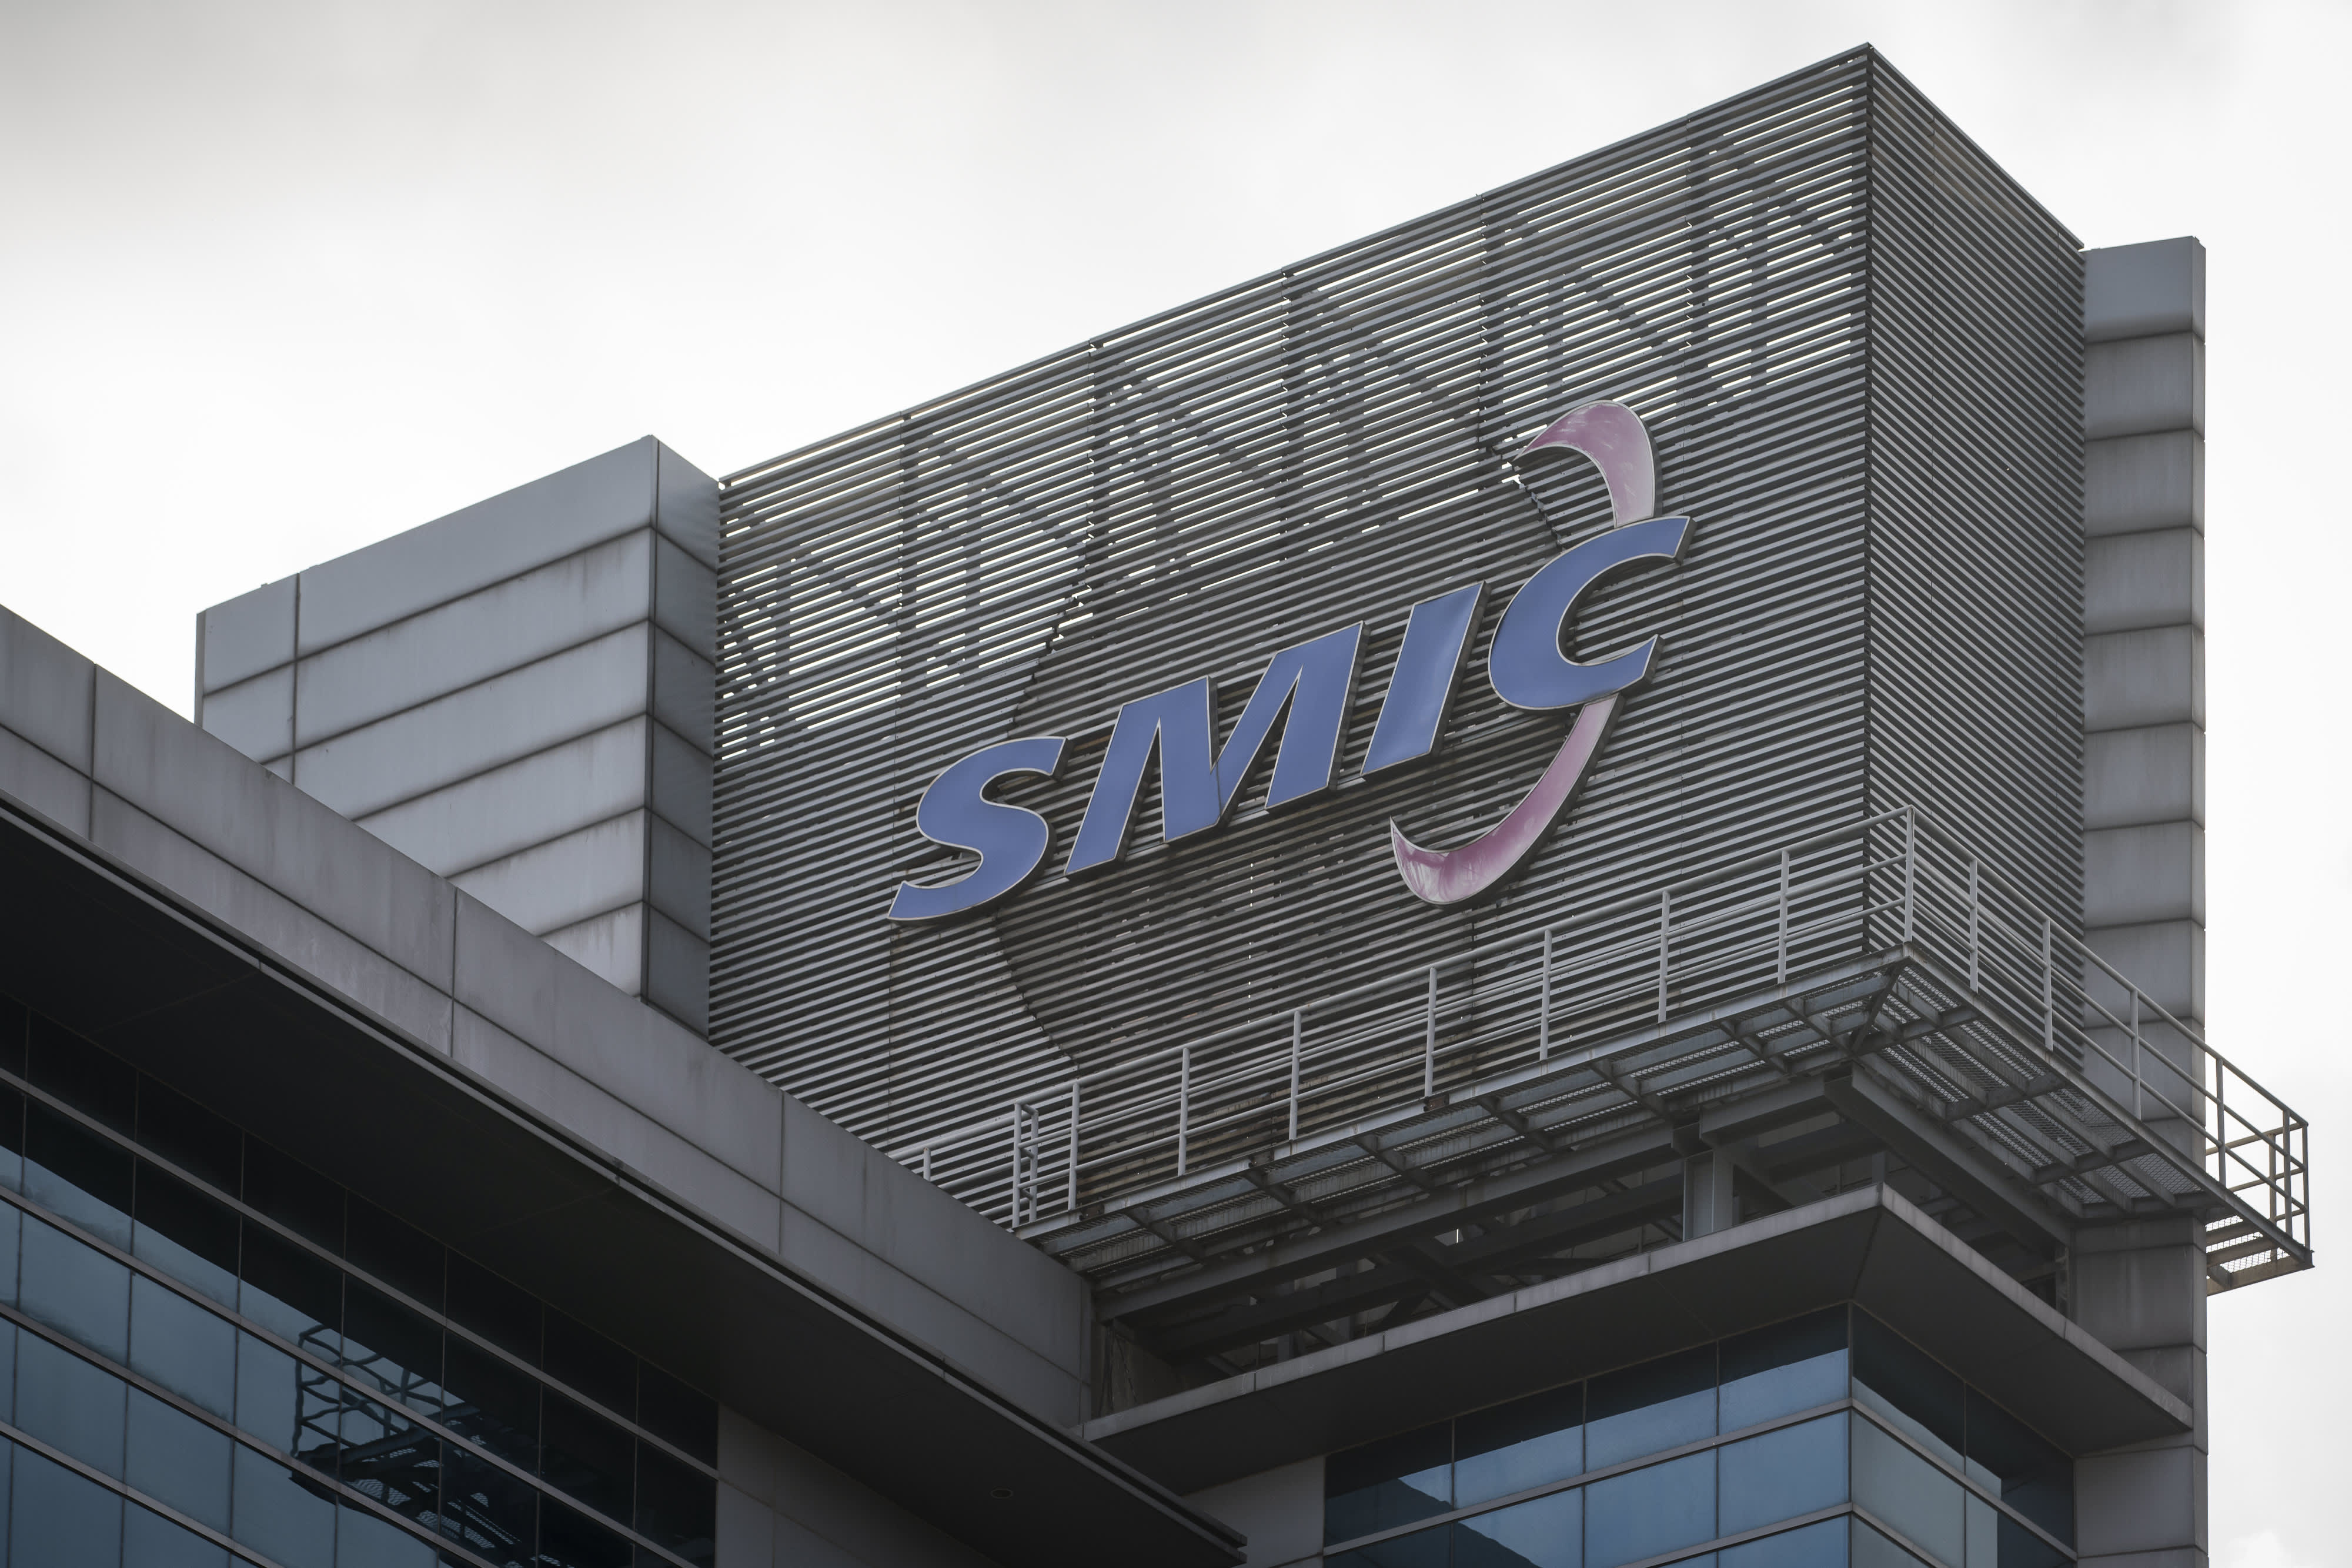 China’s largest semiconductor manufacturer, SMIC, to build $ 2.35 billion plant